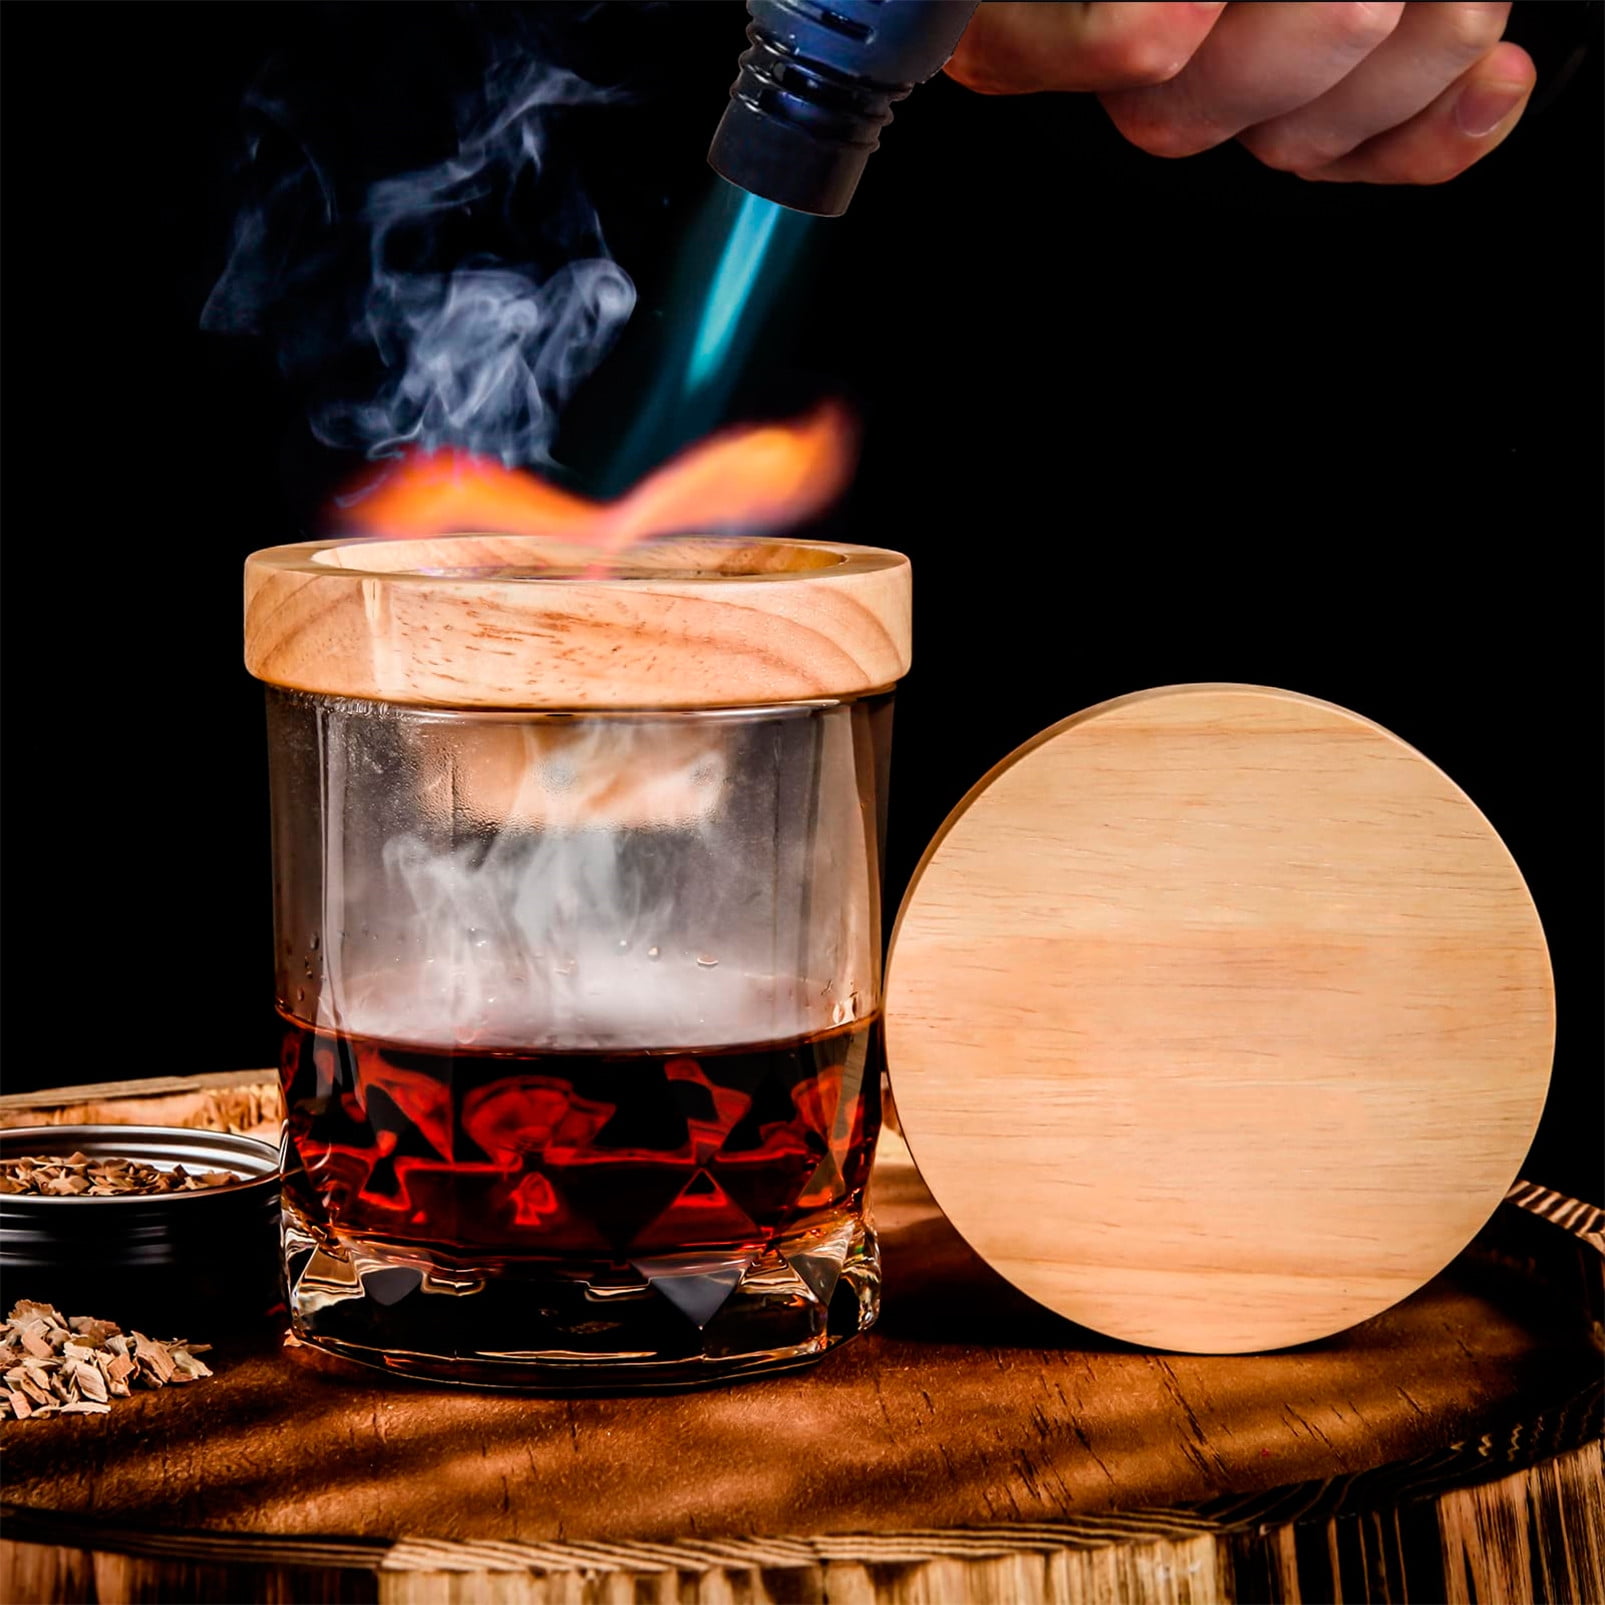 Cocktail Smoker Kit with Torch – Old Fashioned Bourbon Smoking Kit, 4 Flavors Wood Chips – Whiskey Smoke Infuser – Gift for Men or Whiskey Lover (No